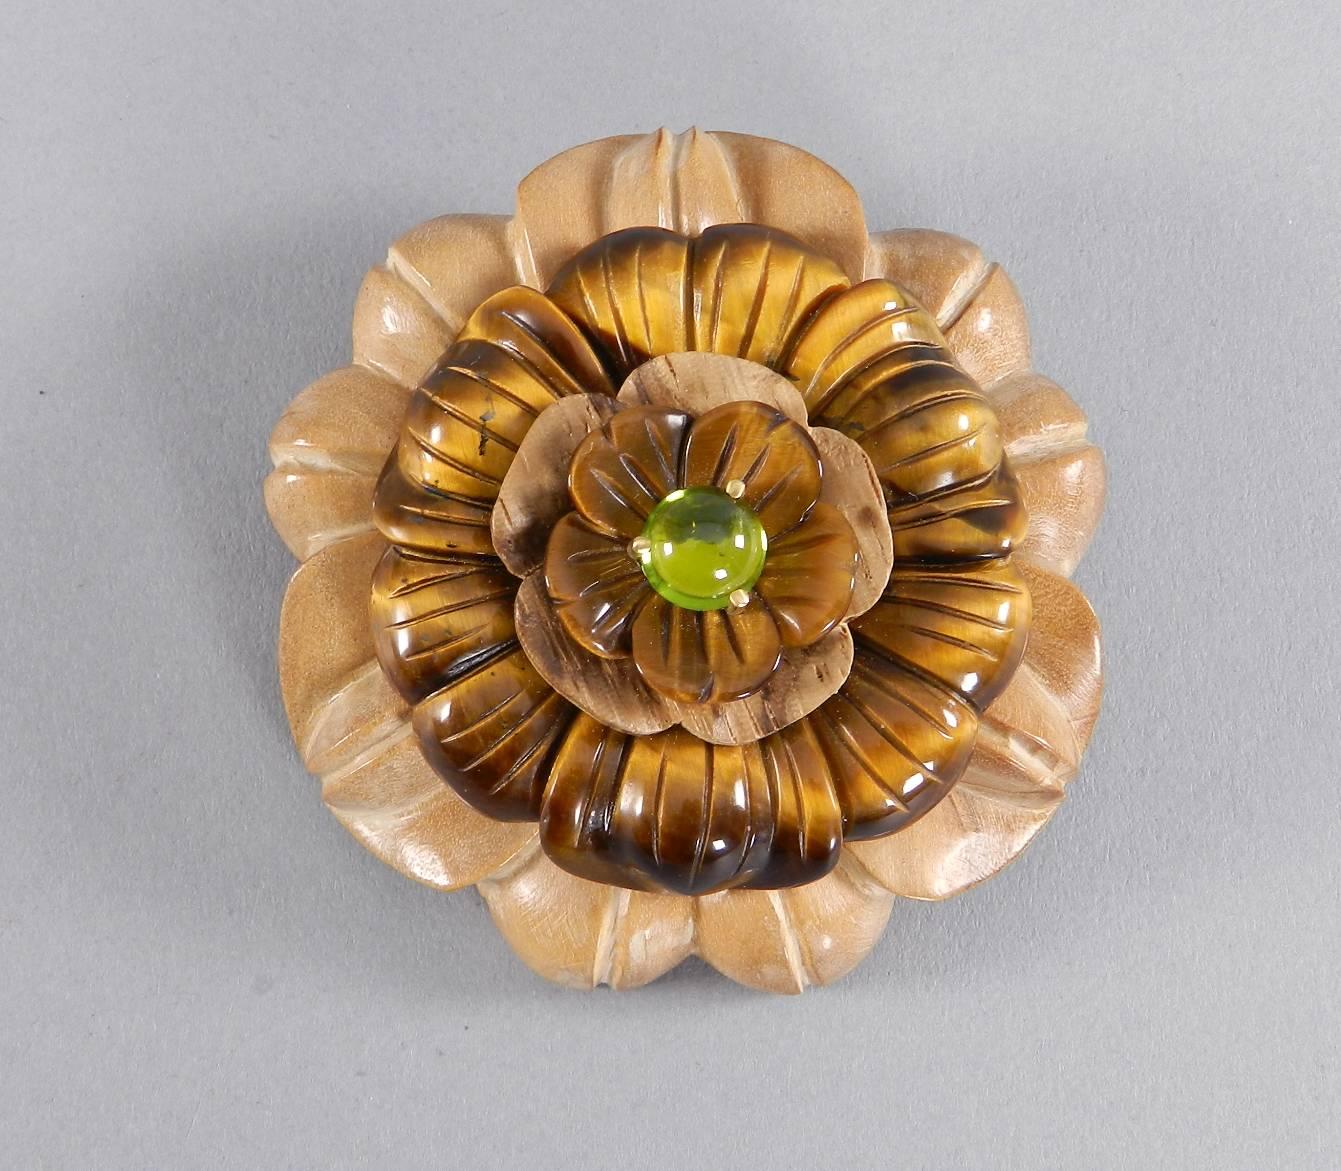 Bettina for Seaman Schepps carved flower brooch. Wood, Tiger eye, peridot, and 18k yellow gold. Excellent condition. Circa 2000. Measures 60 mm across and is 20mm deep.

We ship worldwide.